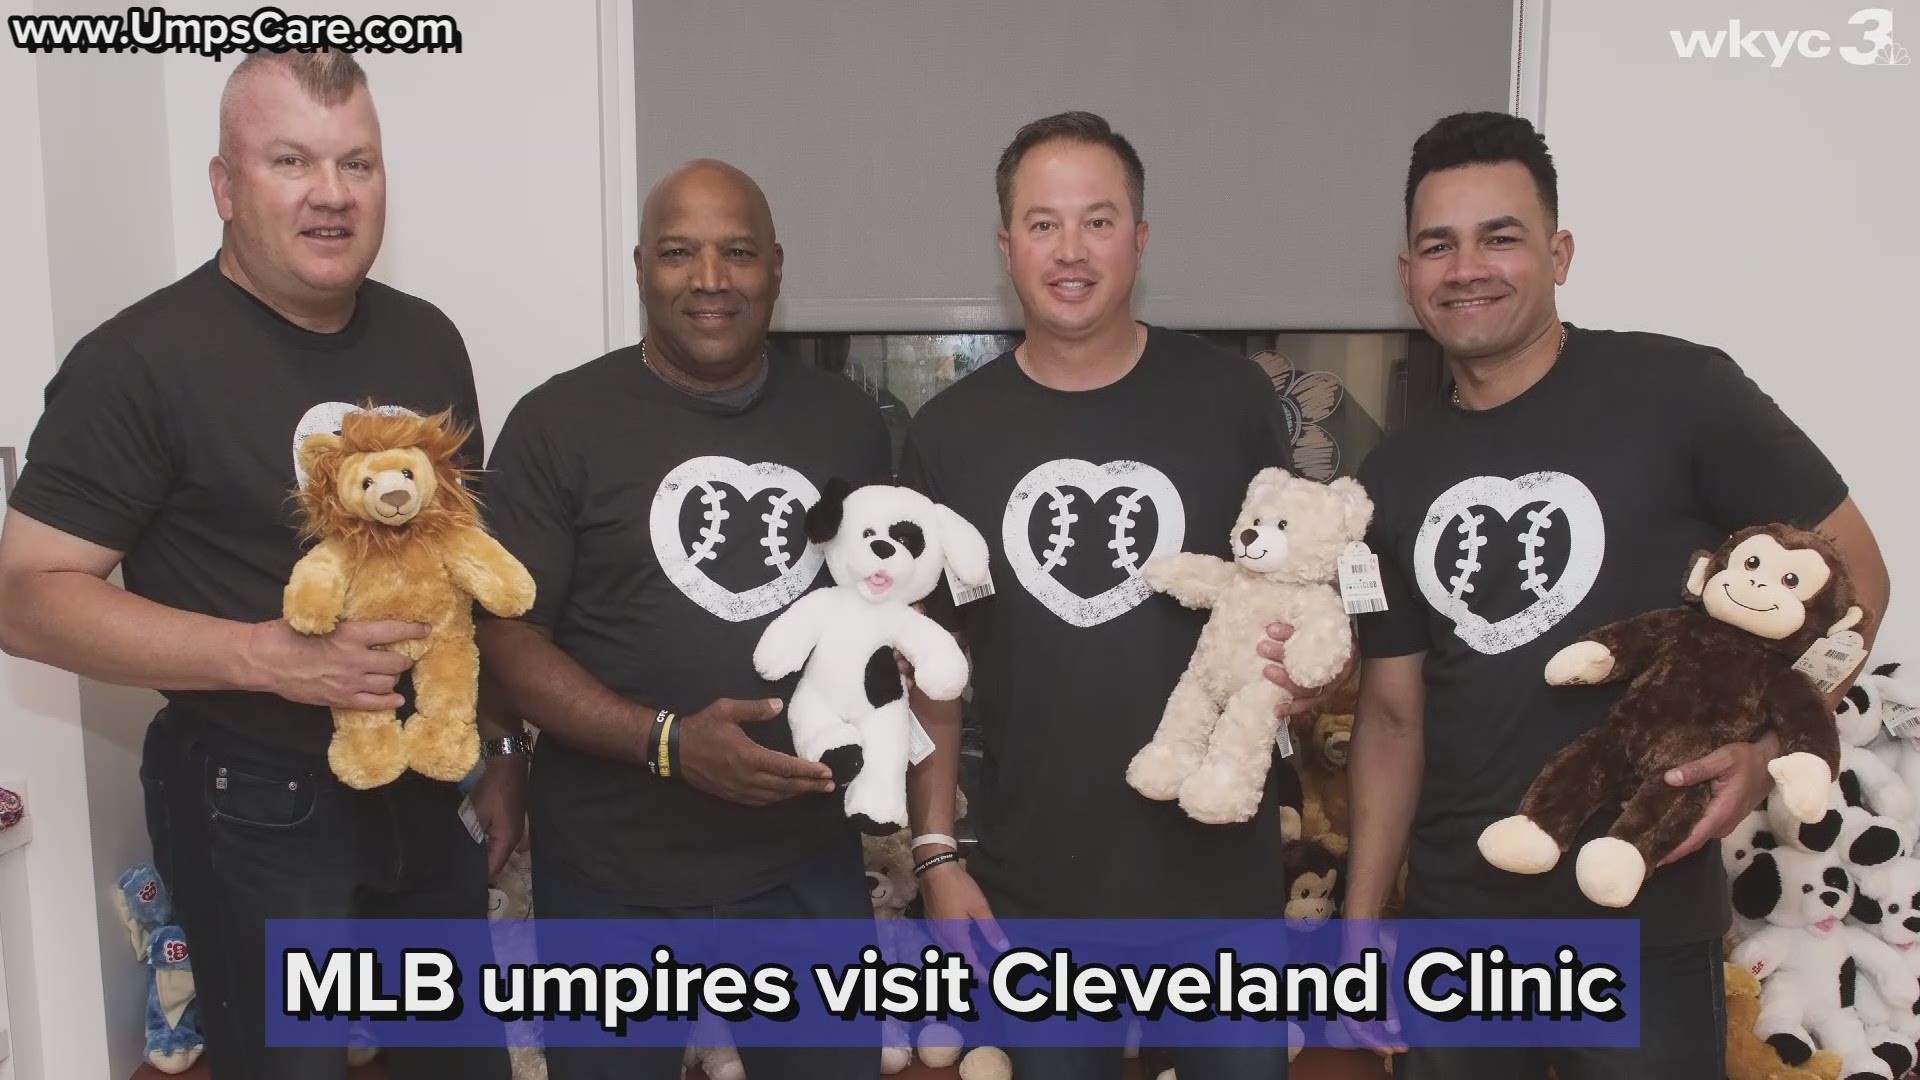 On Wednesday, the umpire crew working the Cleveland Indians-Minnesota Twins series visited children and families at the Cleveland Clinic.